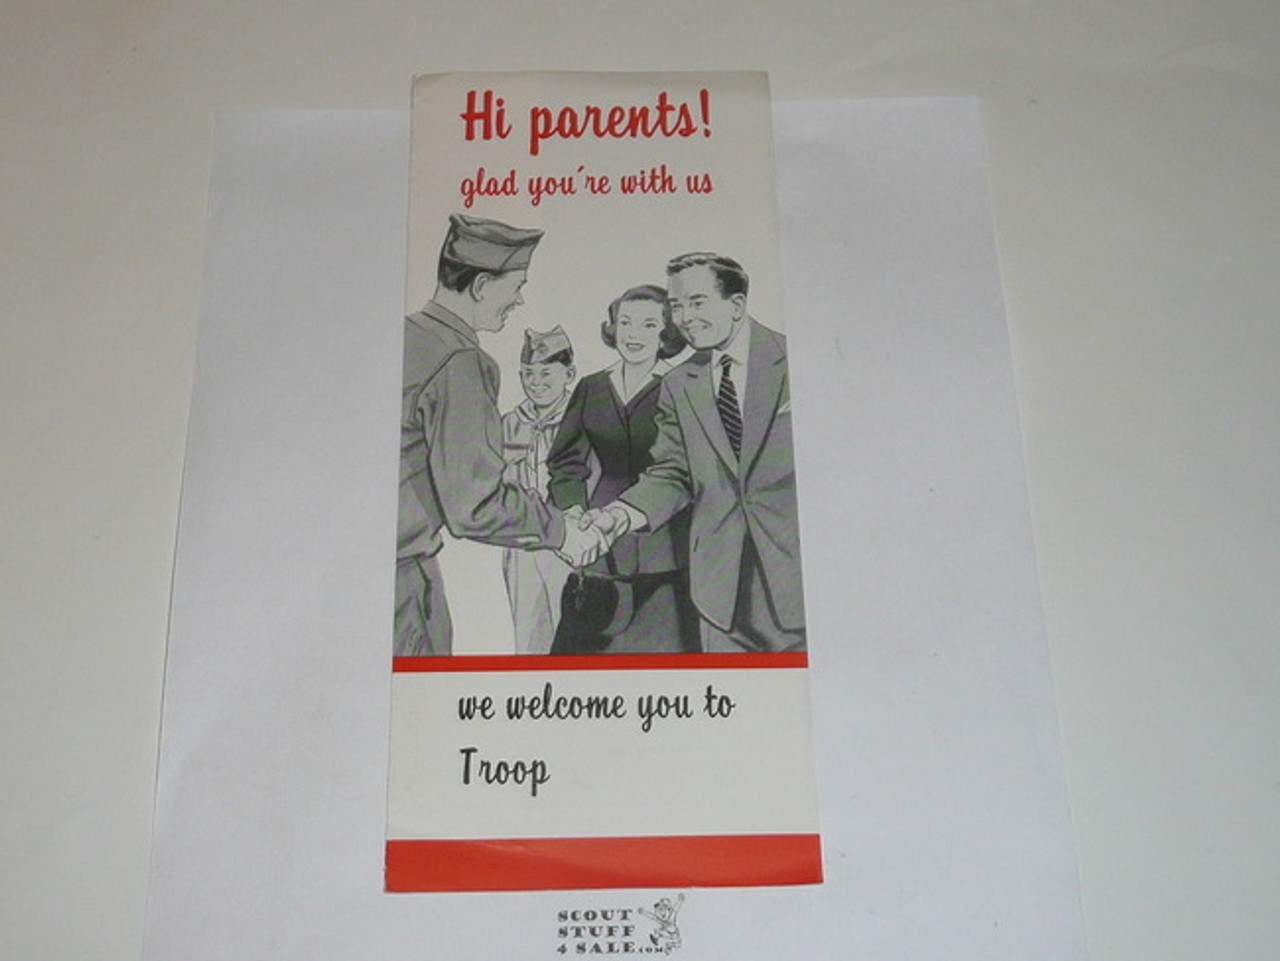 1964 Hi Parents Glad You're with Us, Boy Scout Promotional Brochure, 2-64 printing